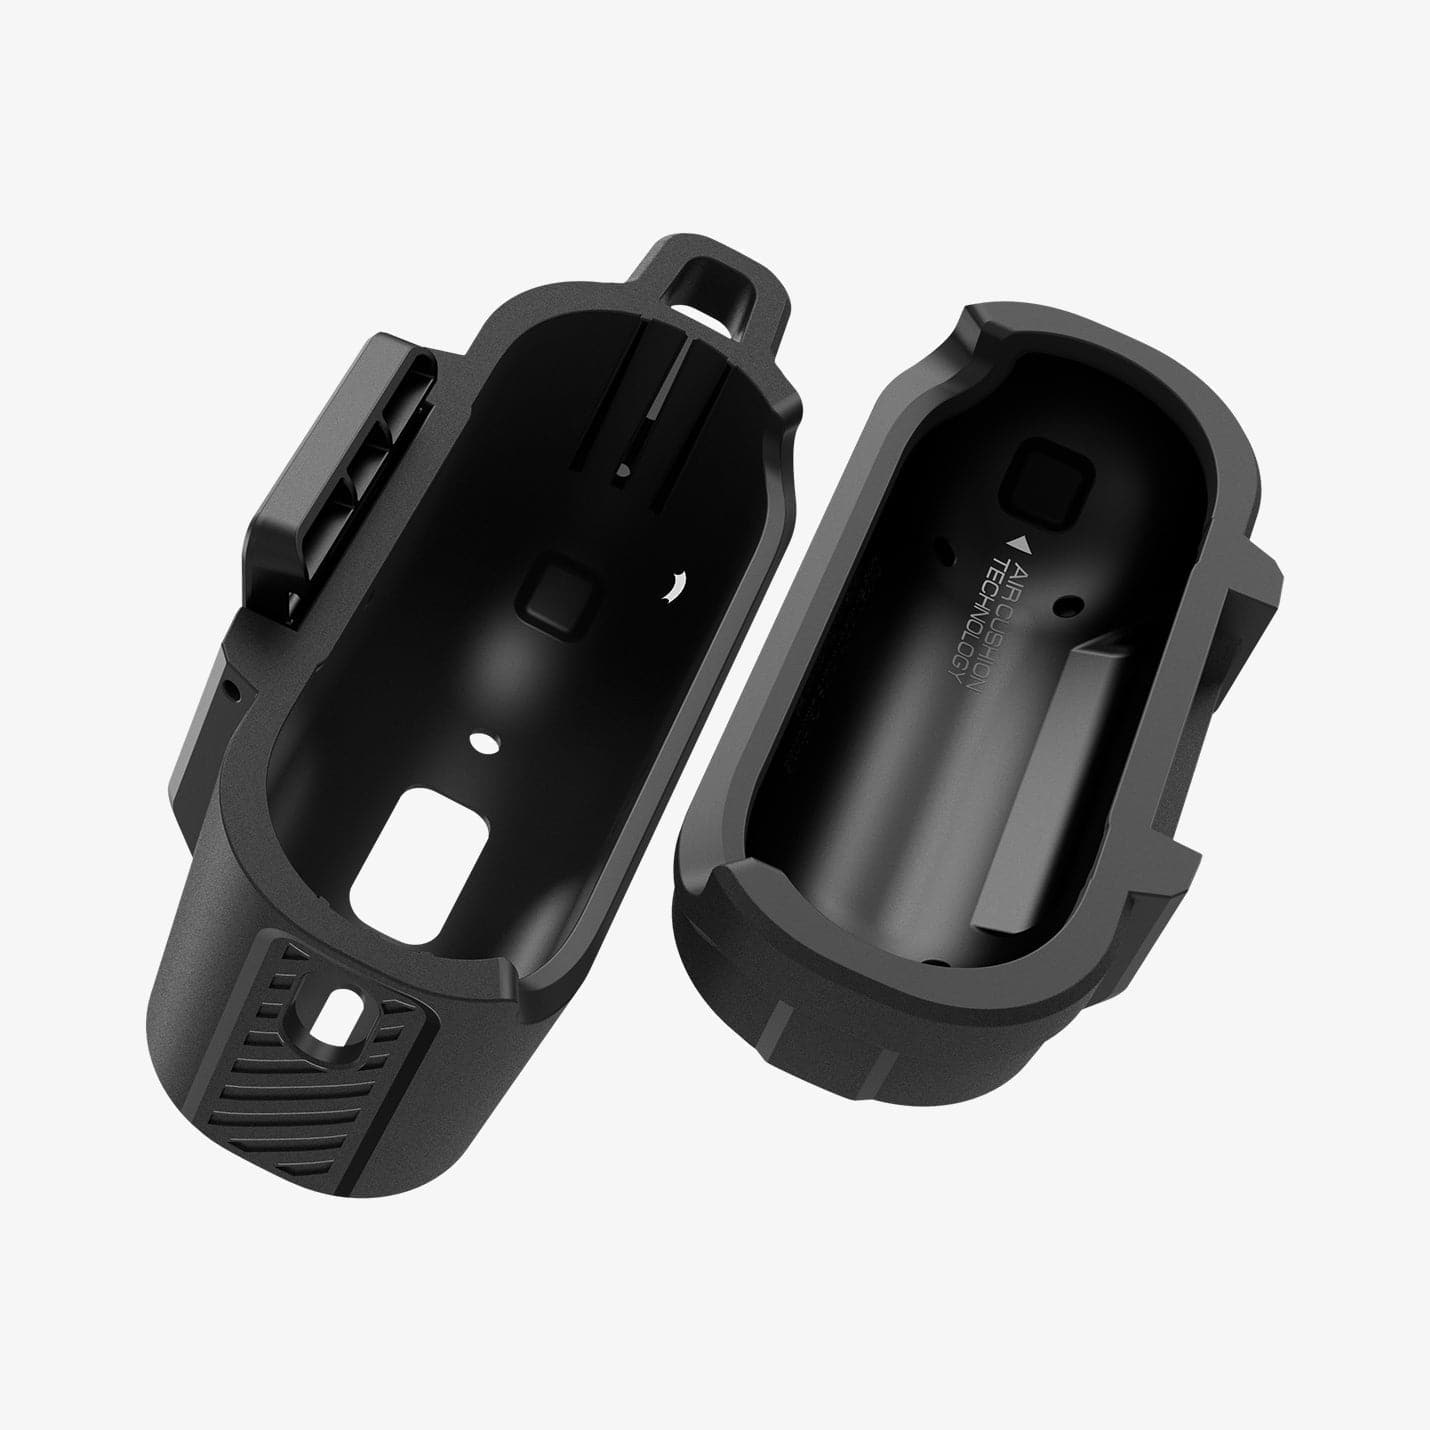 ACS05485 - Apple AirPods Pro 2 Case Lock Fit in matte black showing the inside of case